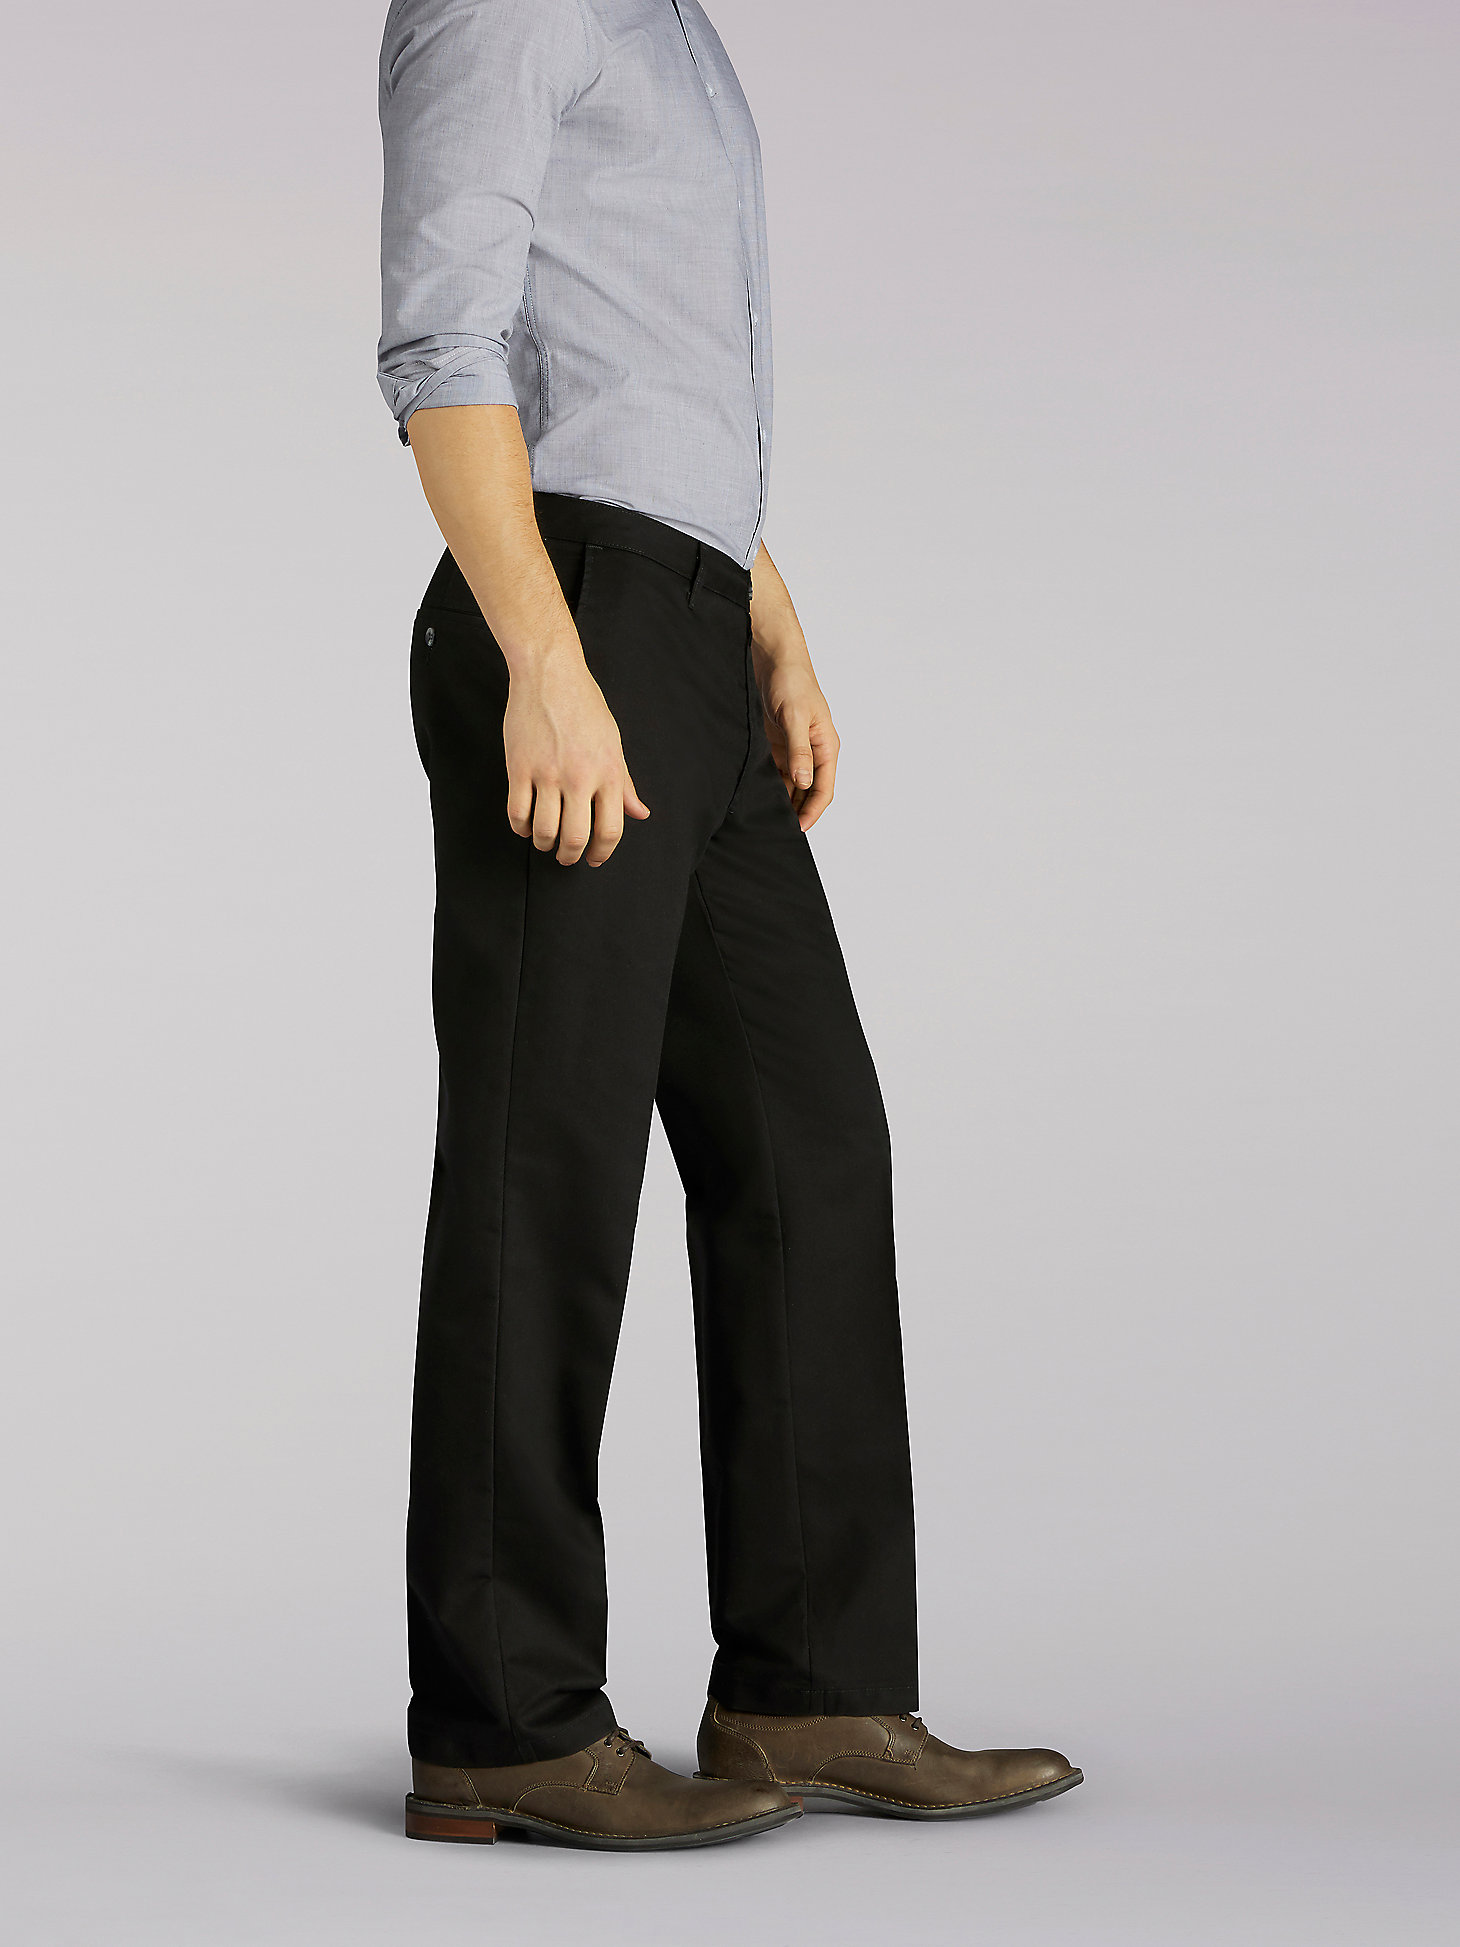 Men’s Total Freedom Relaxed Fit Tapered Leg Pants (Big&Tall) in Black alternative view 2